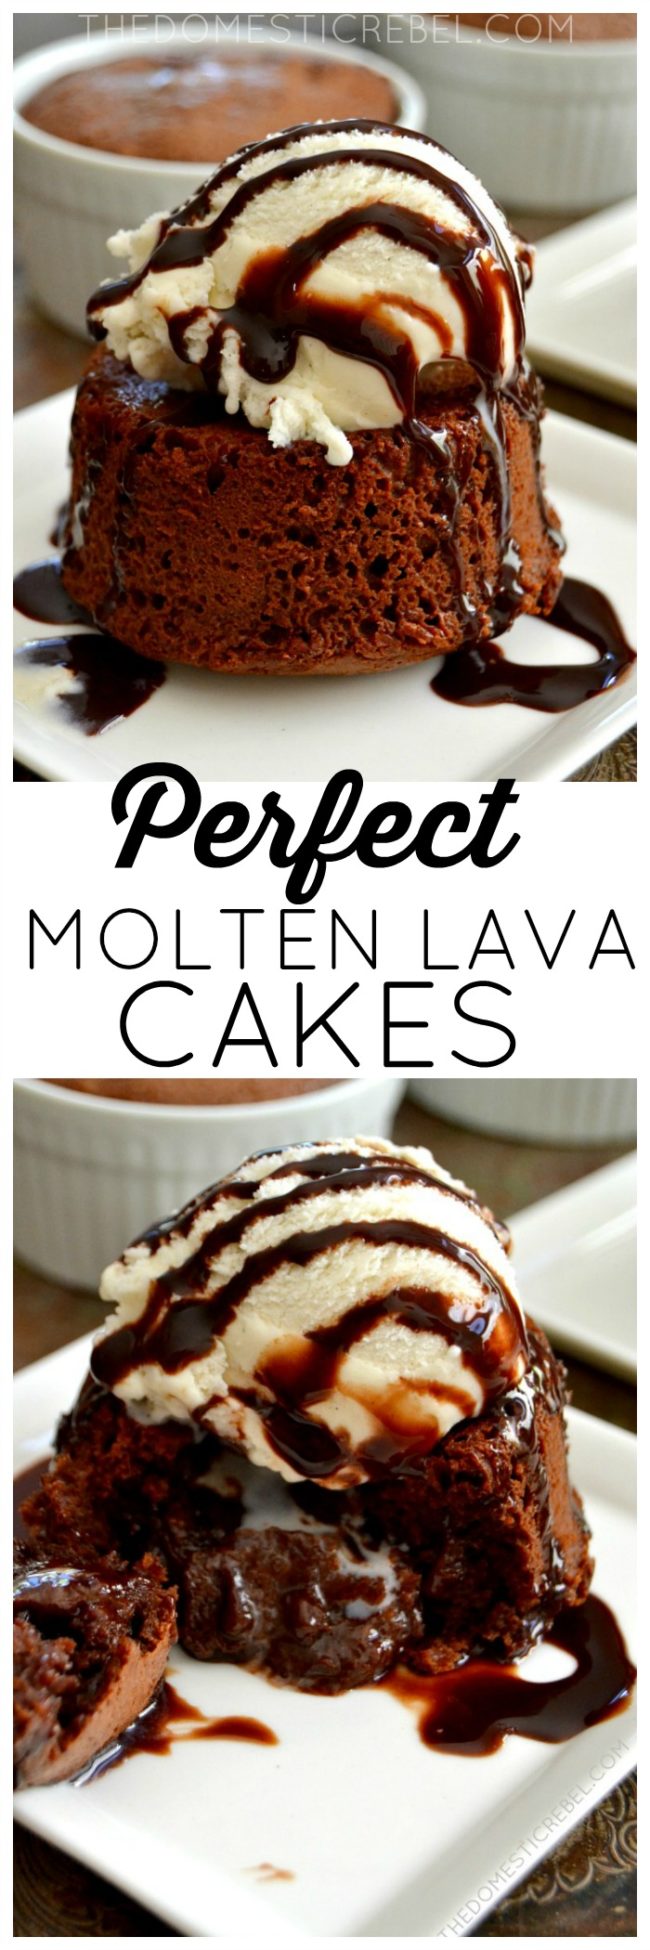 This <a href="http://thedomesticrebel.com/2015/07/15/perfect-molten-lava-cakes/" target="_blank">molten lava cake</a> speaks for itself.